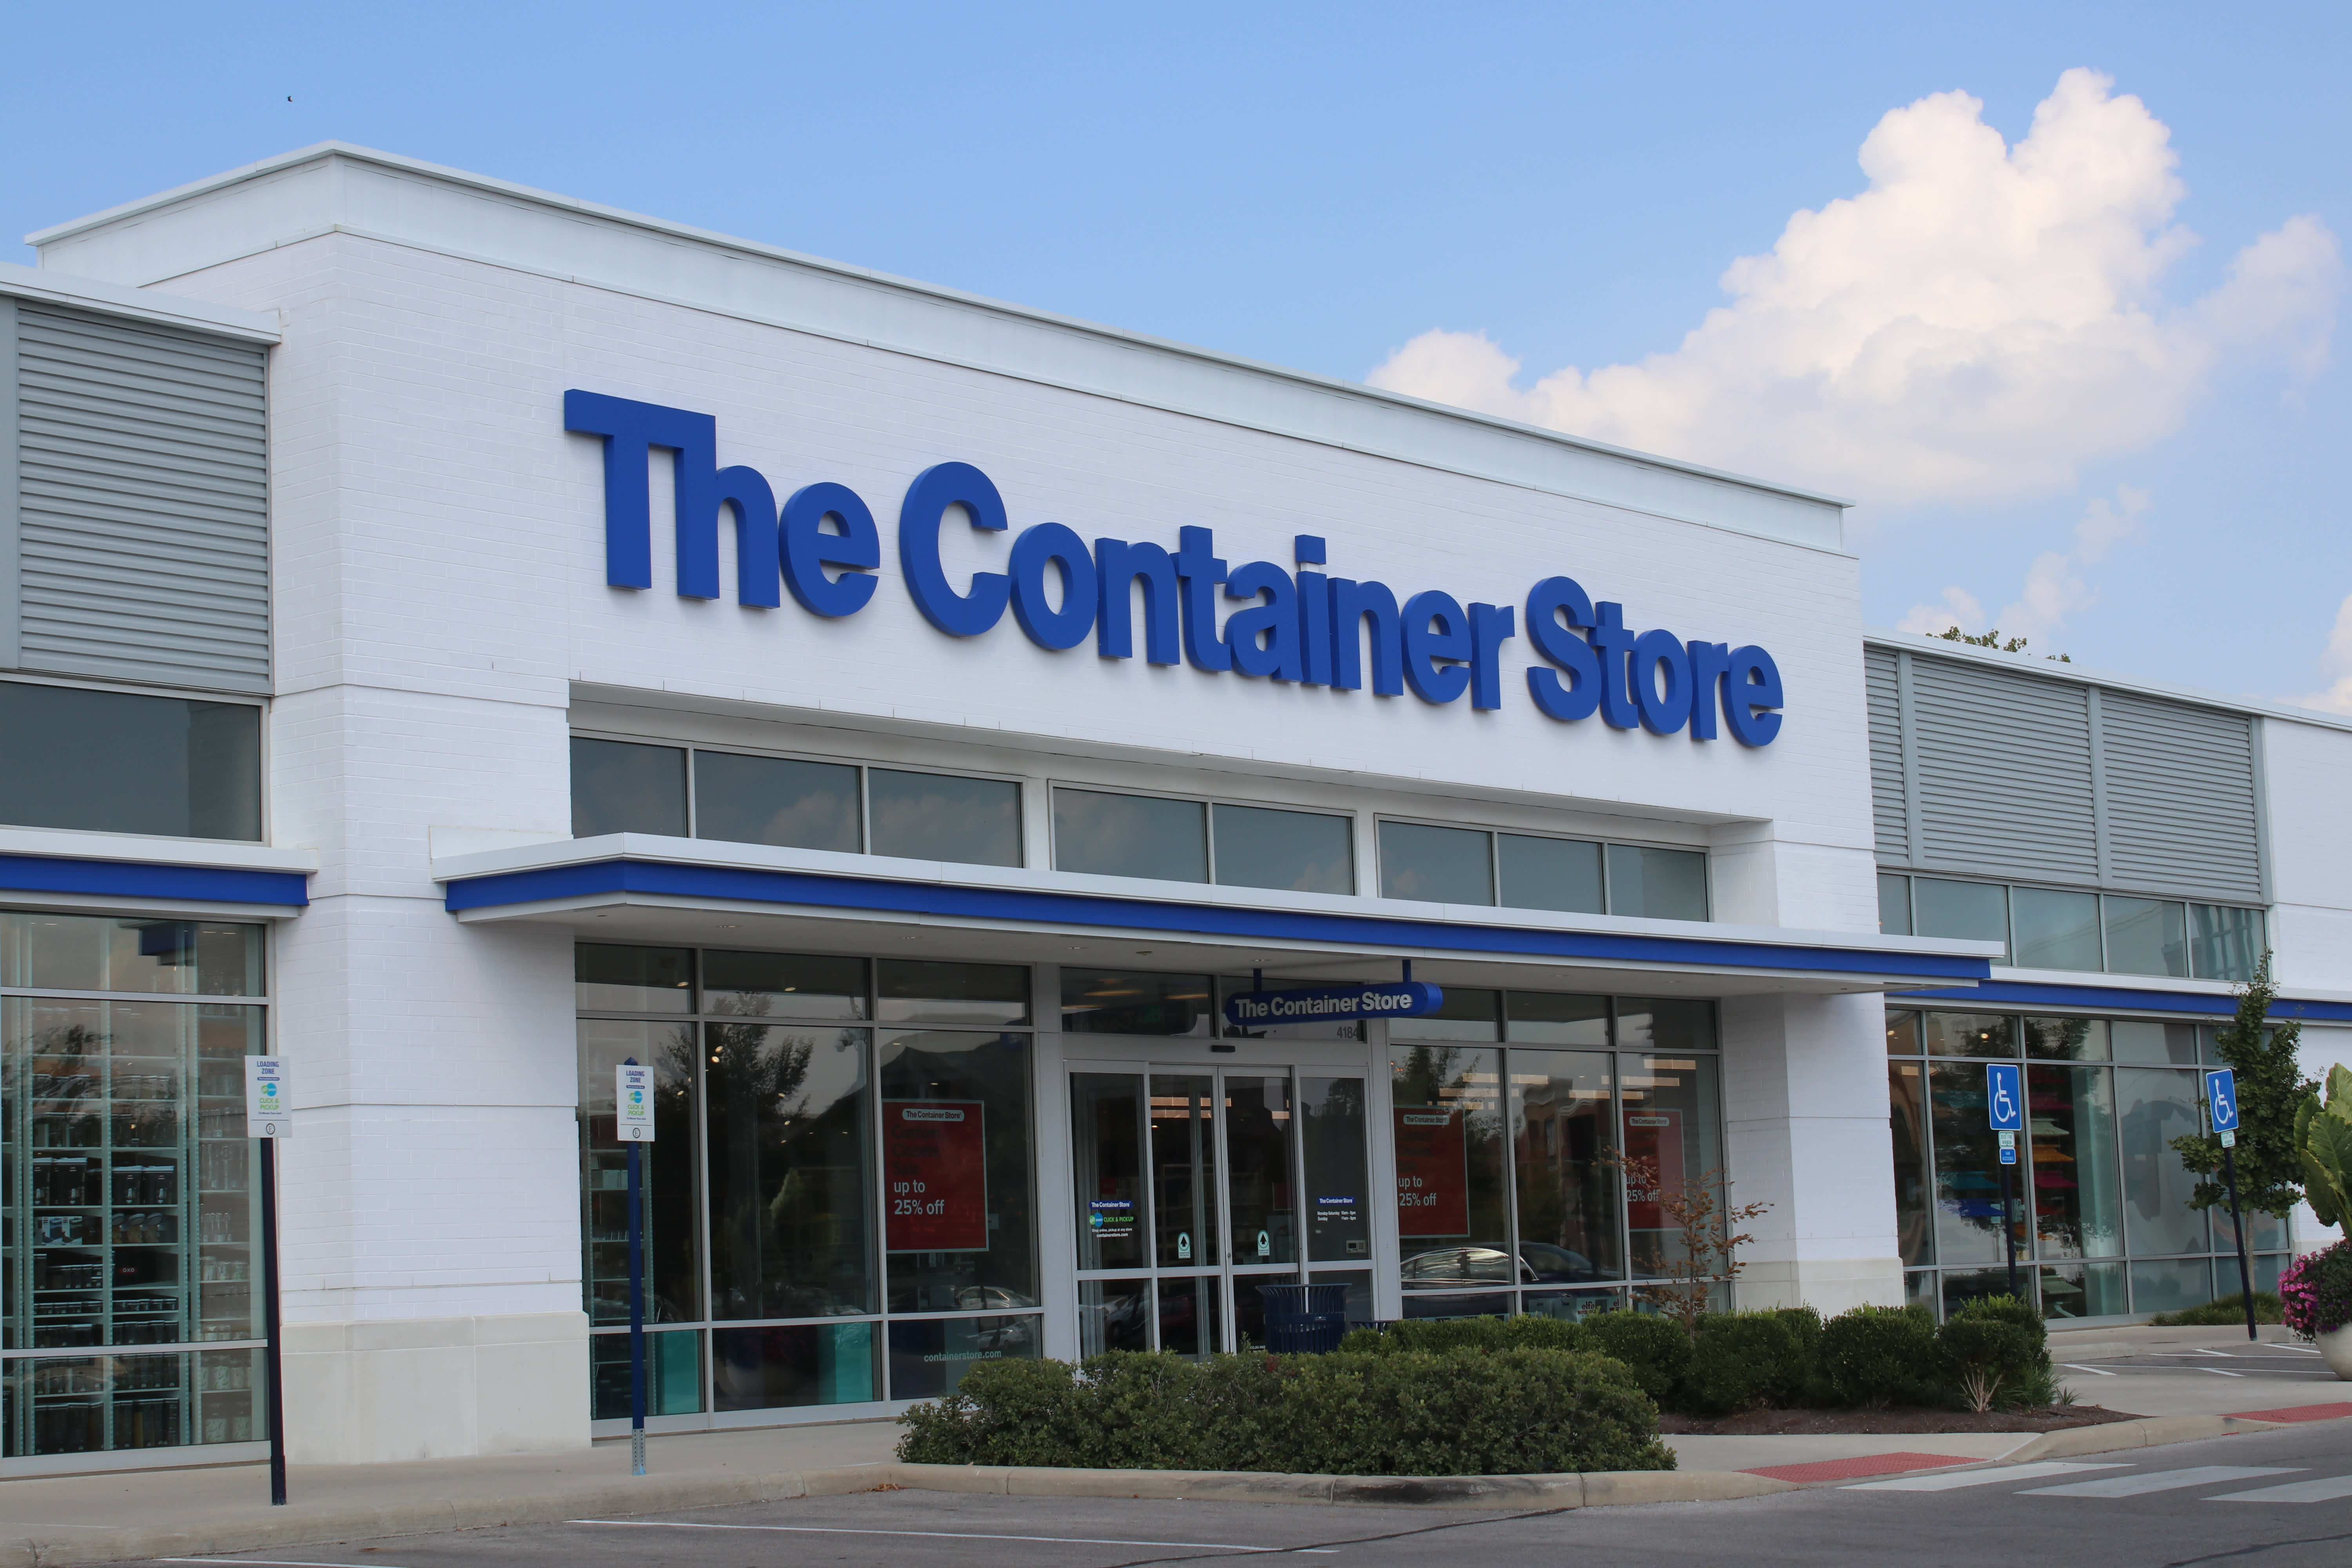 15 Container Store Must-Haves [Organizing The New House]